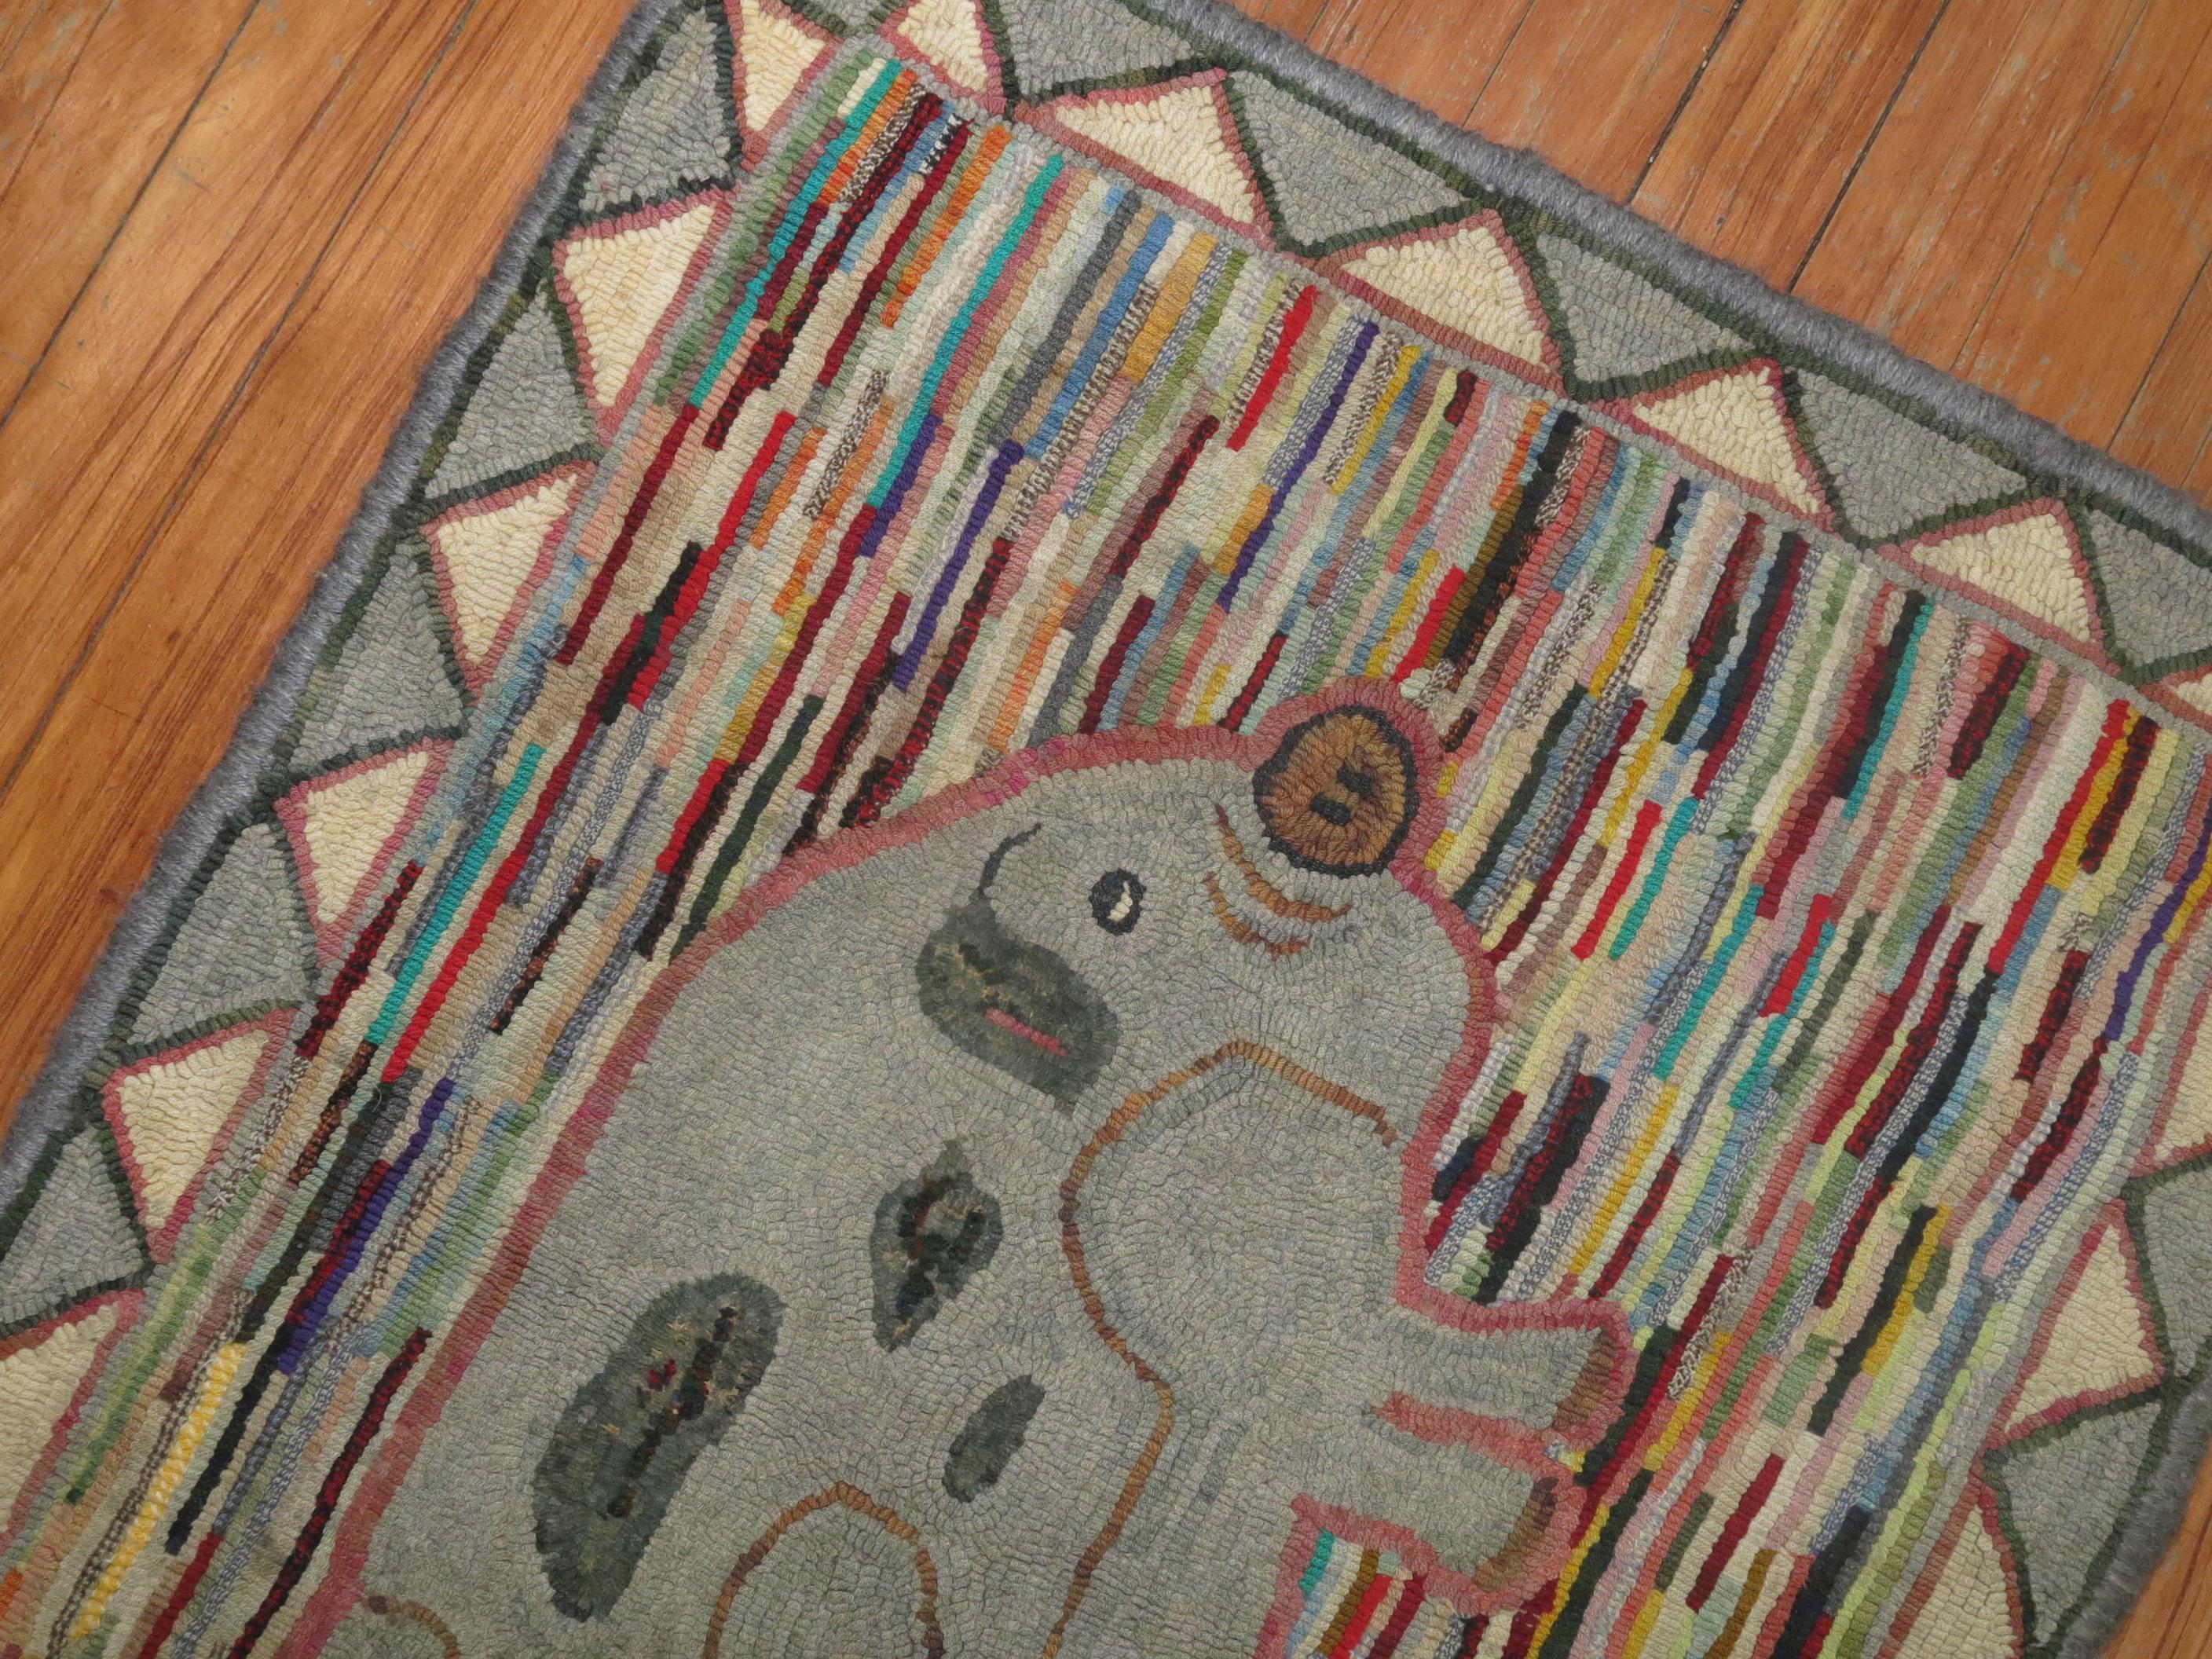 A handmade one of a kind decorative American hooked rug from the early part of the 20th century depicting a pig. Condition is really nice. No stains, no tears, has been professionally cleaned. Blue fabric backing added for extra protection.